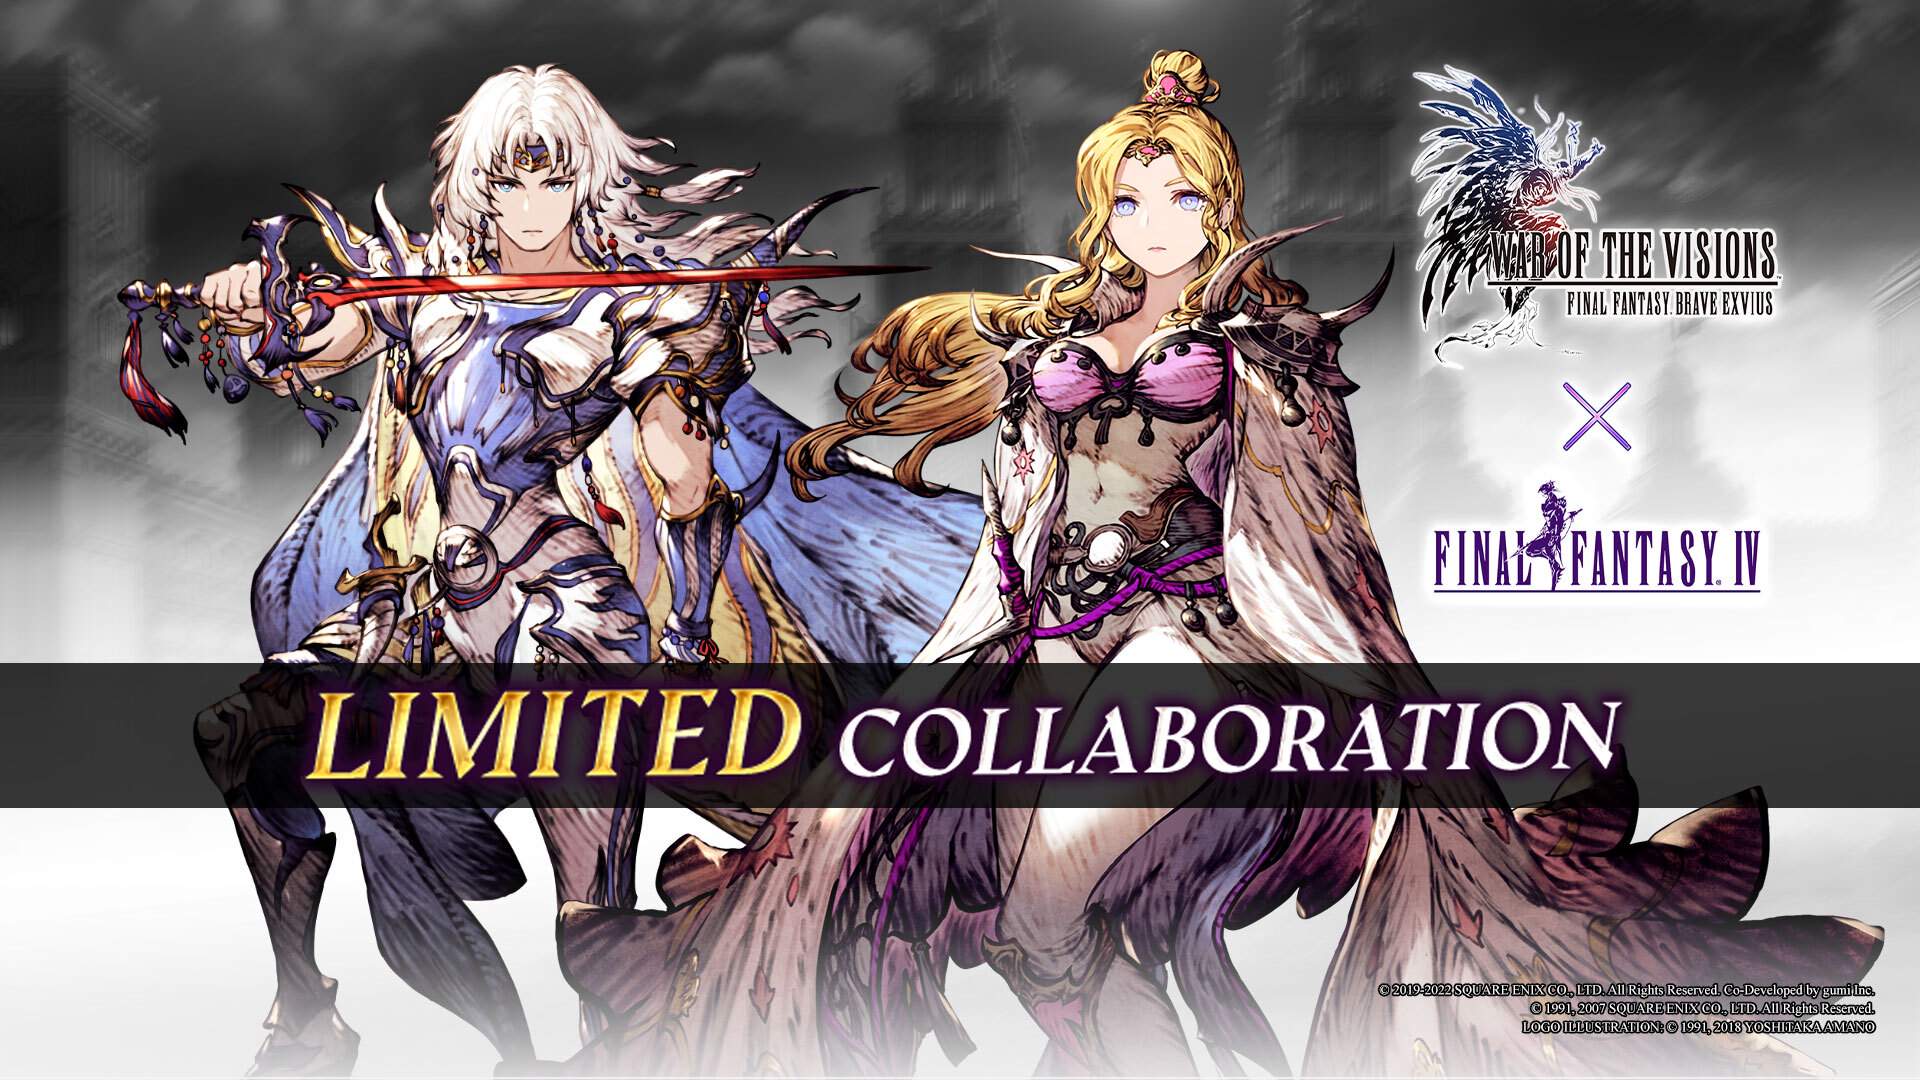 FFIV Comes To War of the Visions: Final Fantasy Brave Exvius In